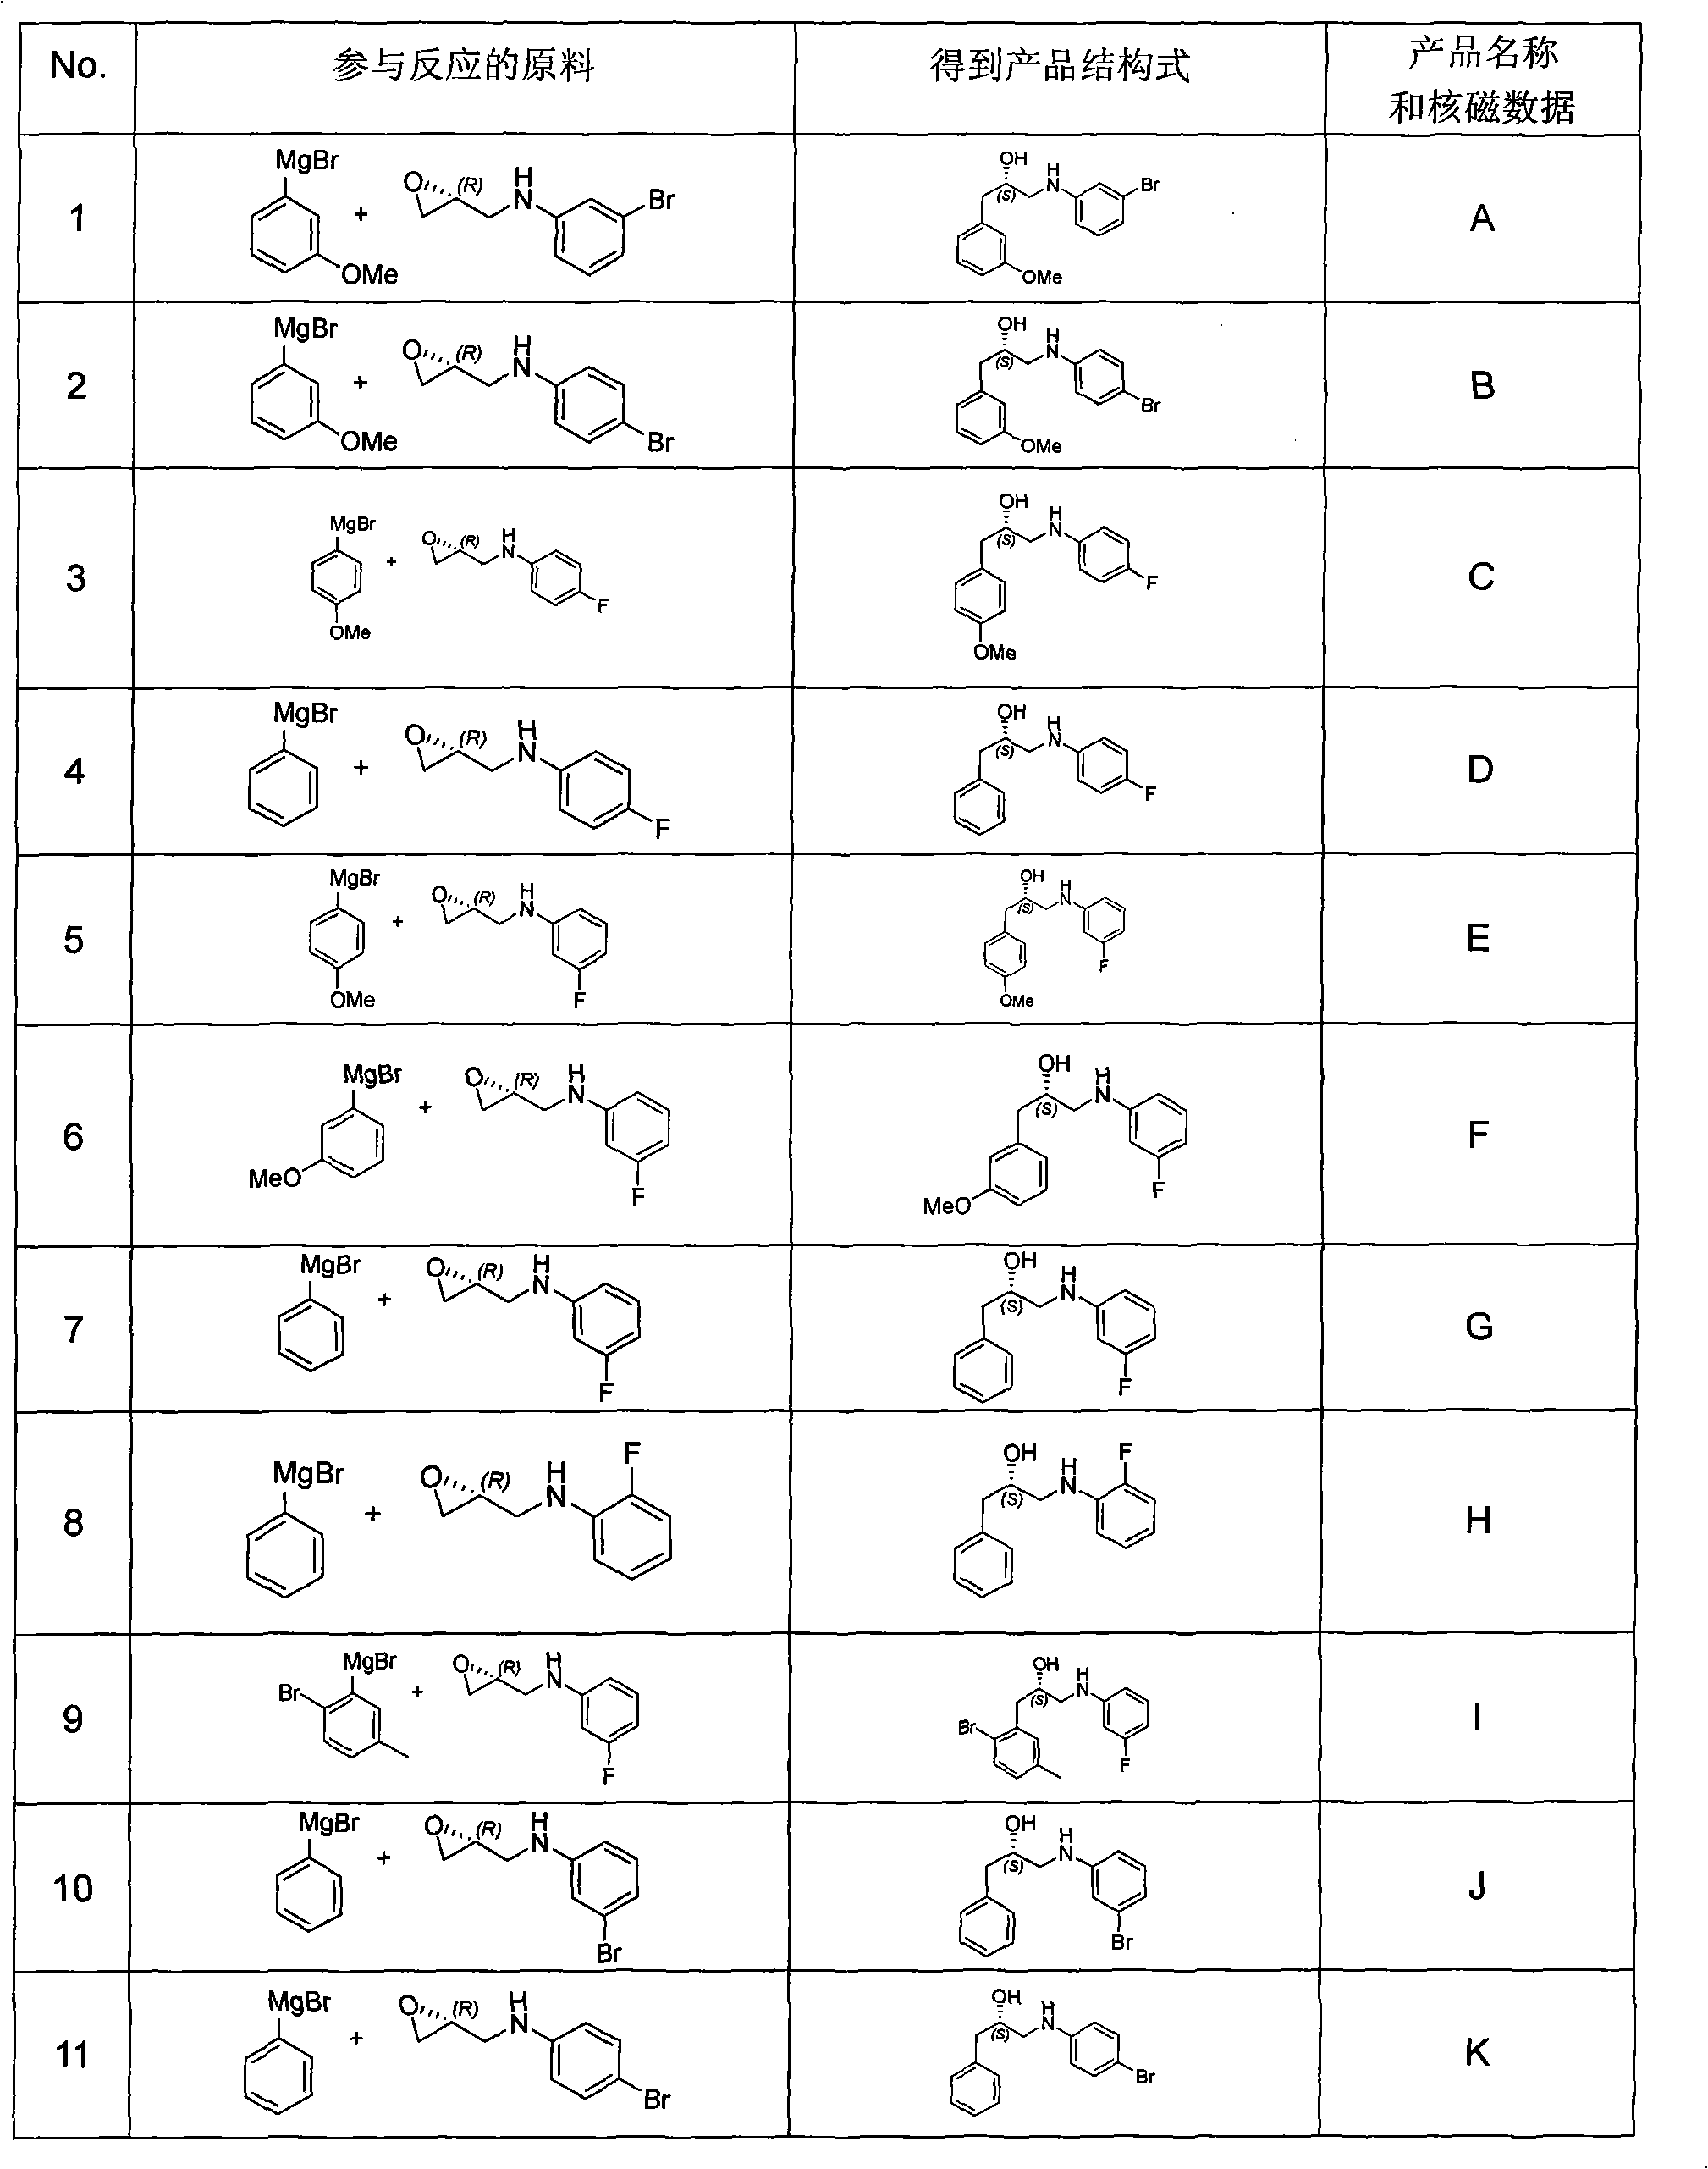 Synthesizing method, partial intermediate products and final products of chiral beta-alkamine derivative